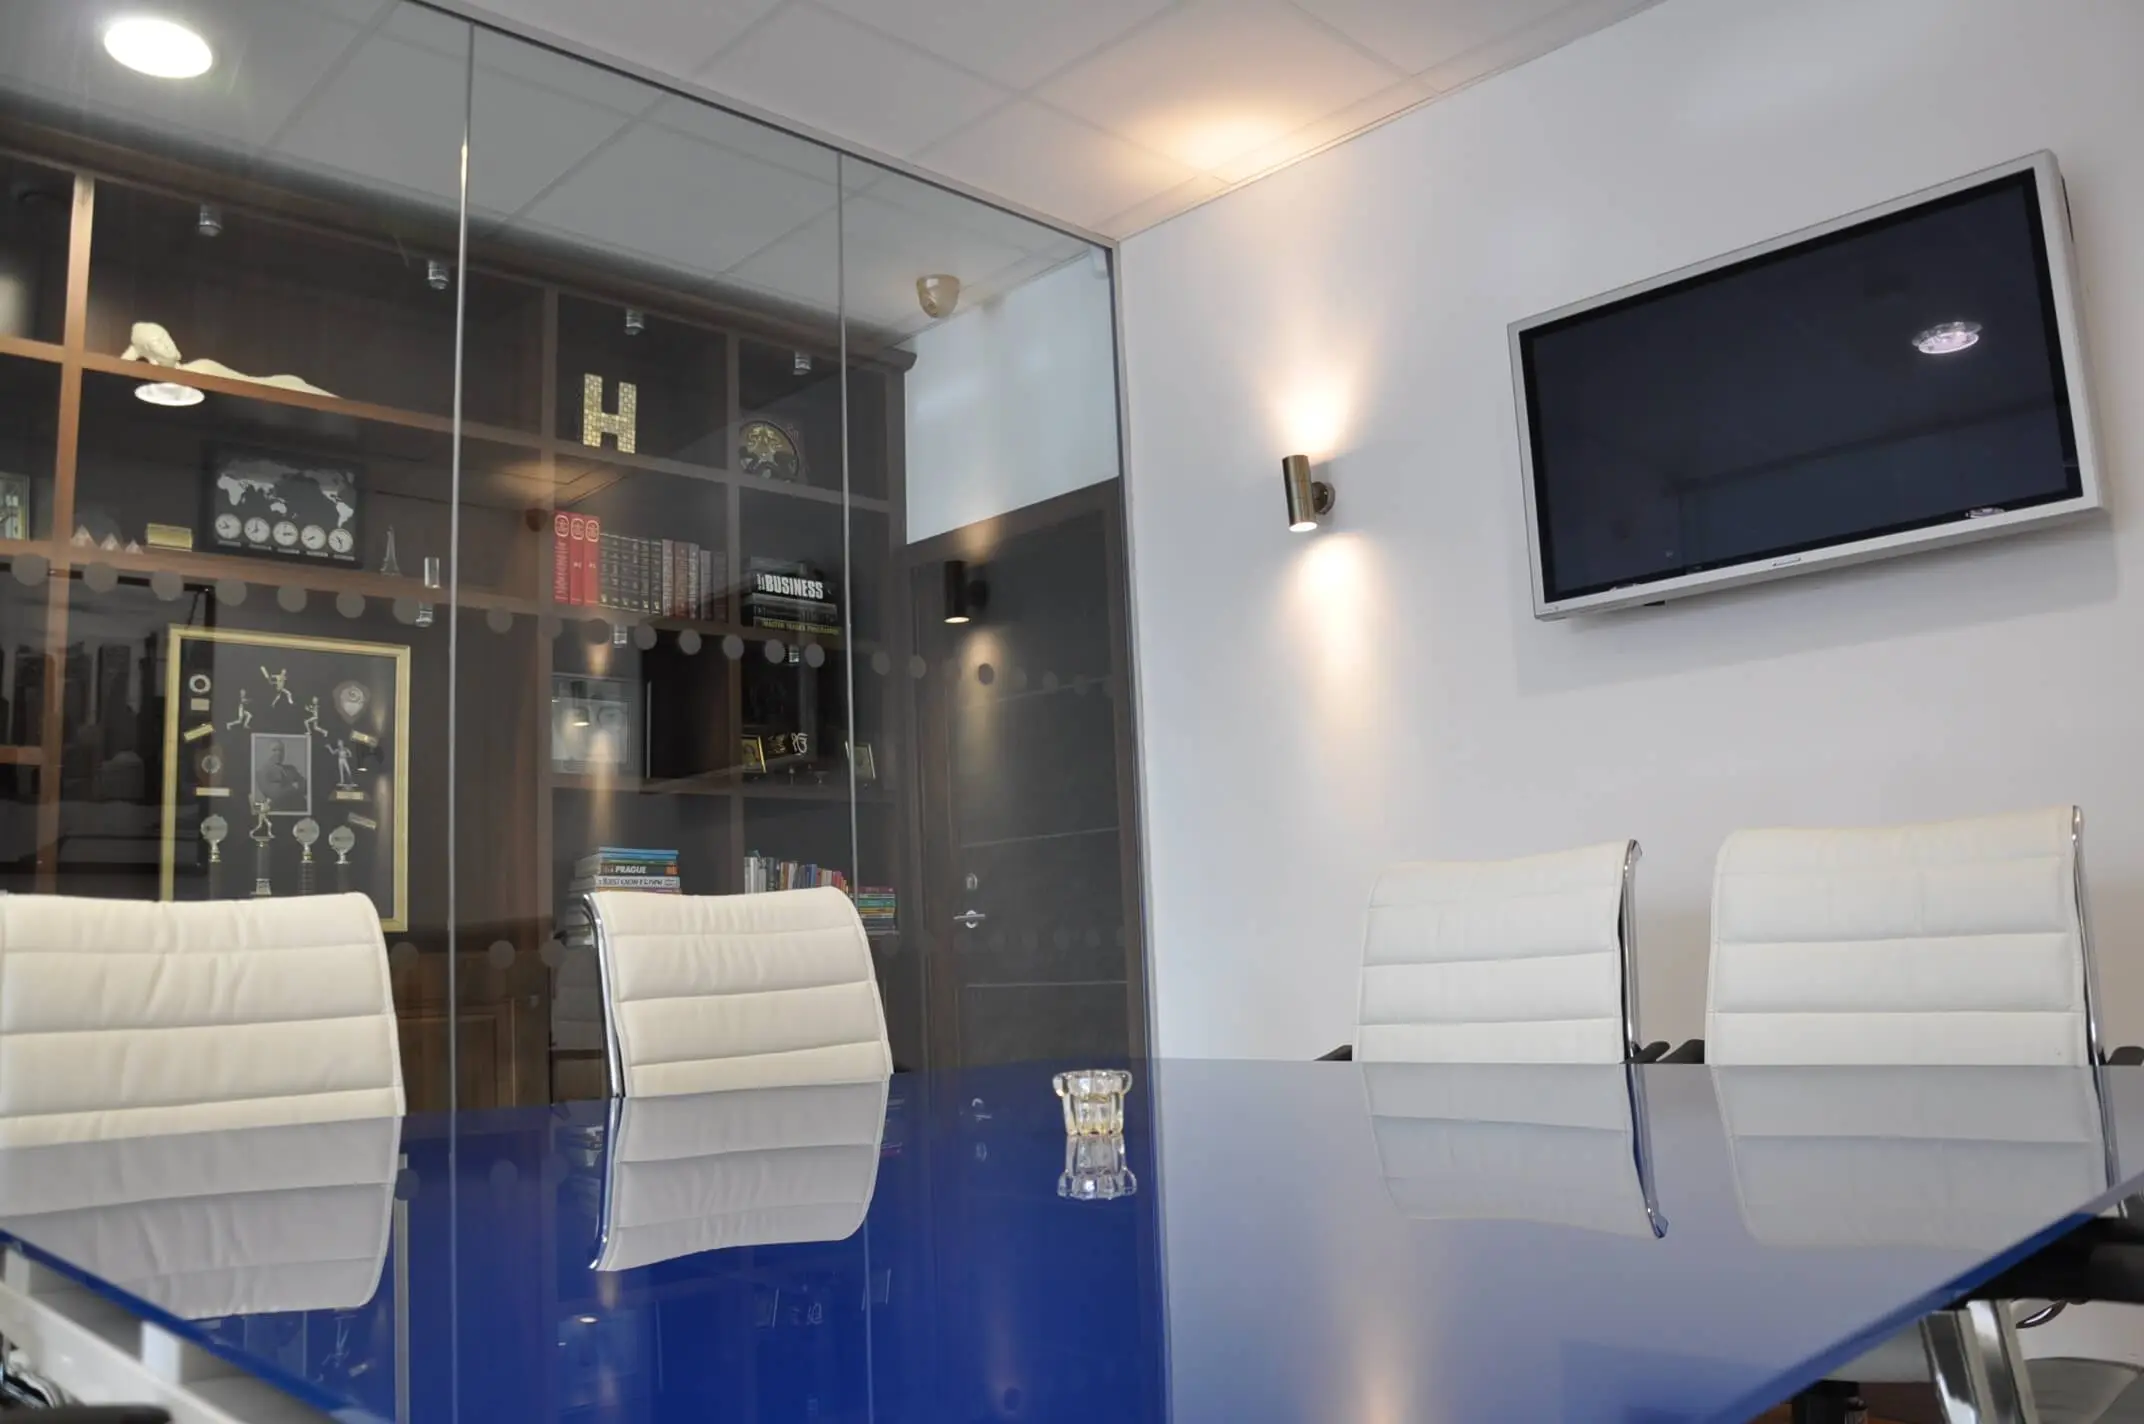 Meeting room with table, chairs, TV, Storage and glass walls